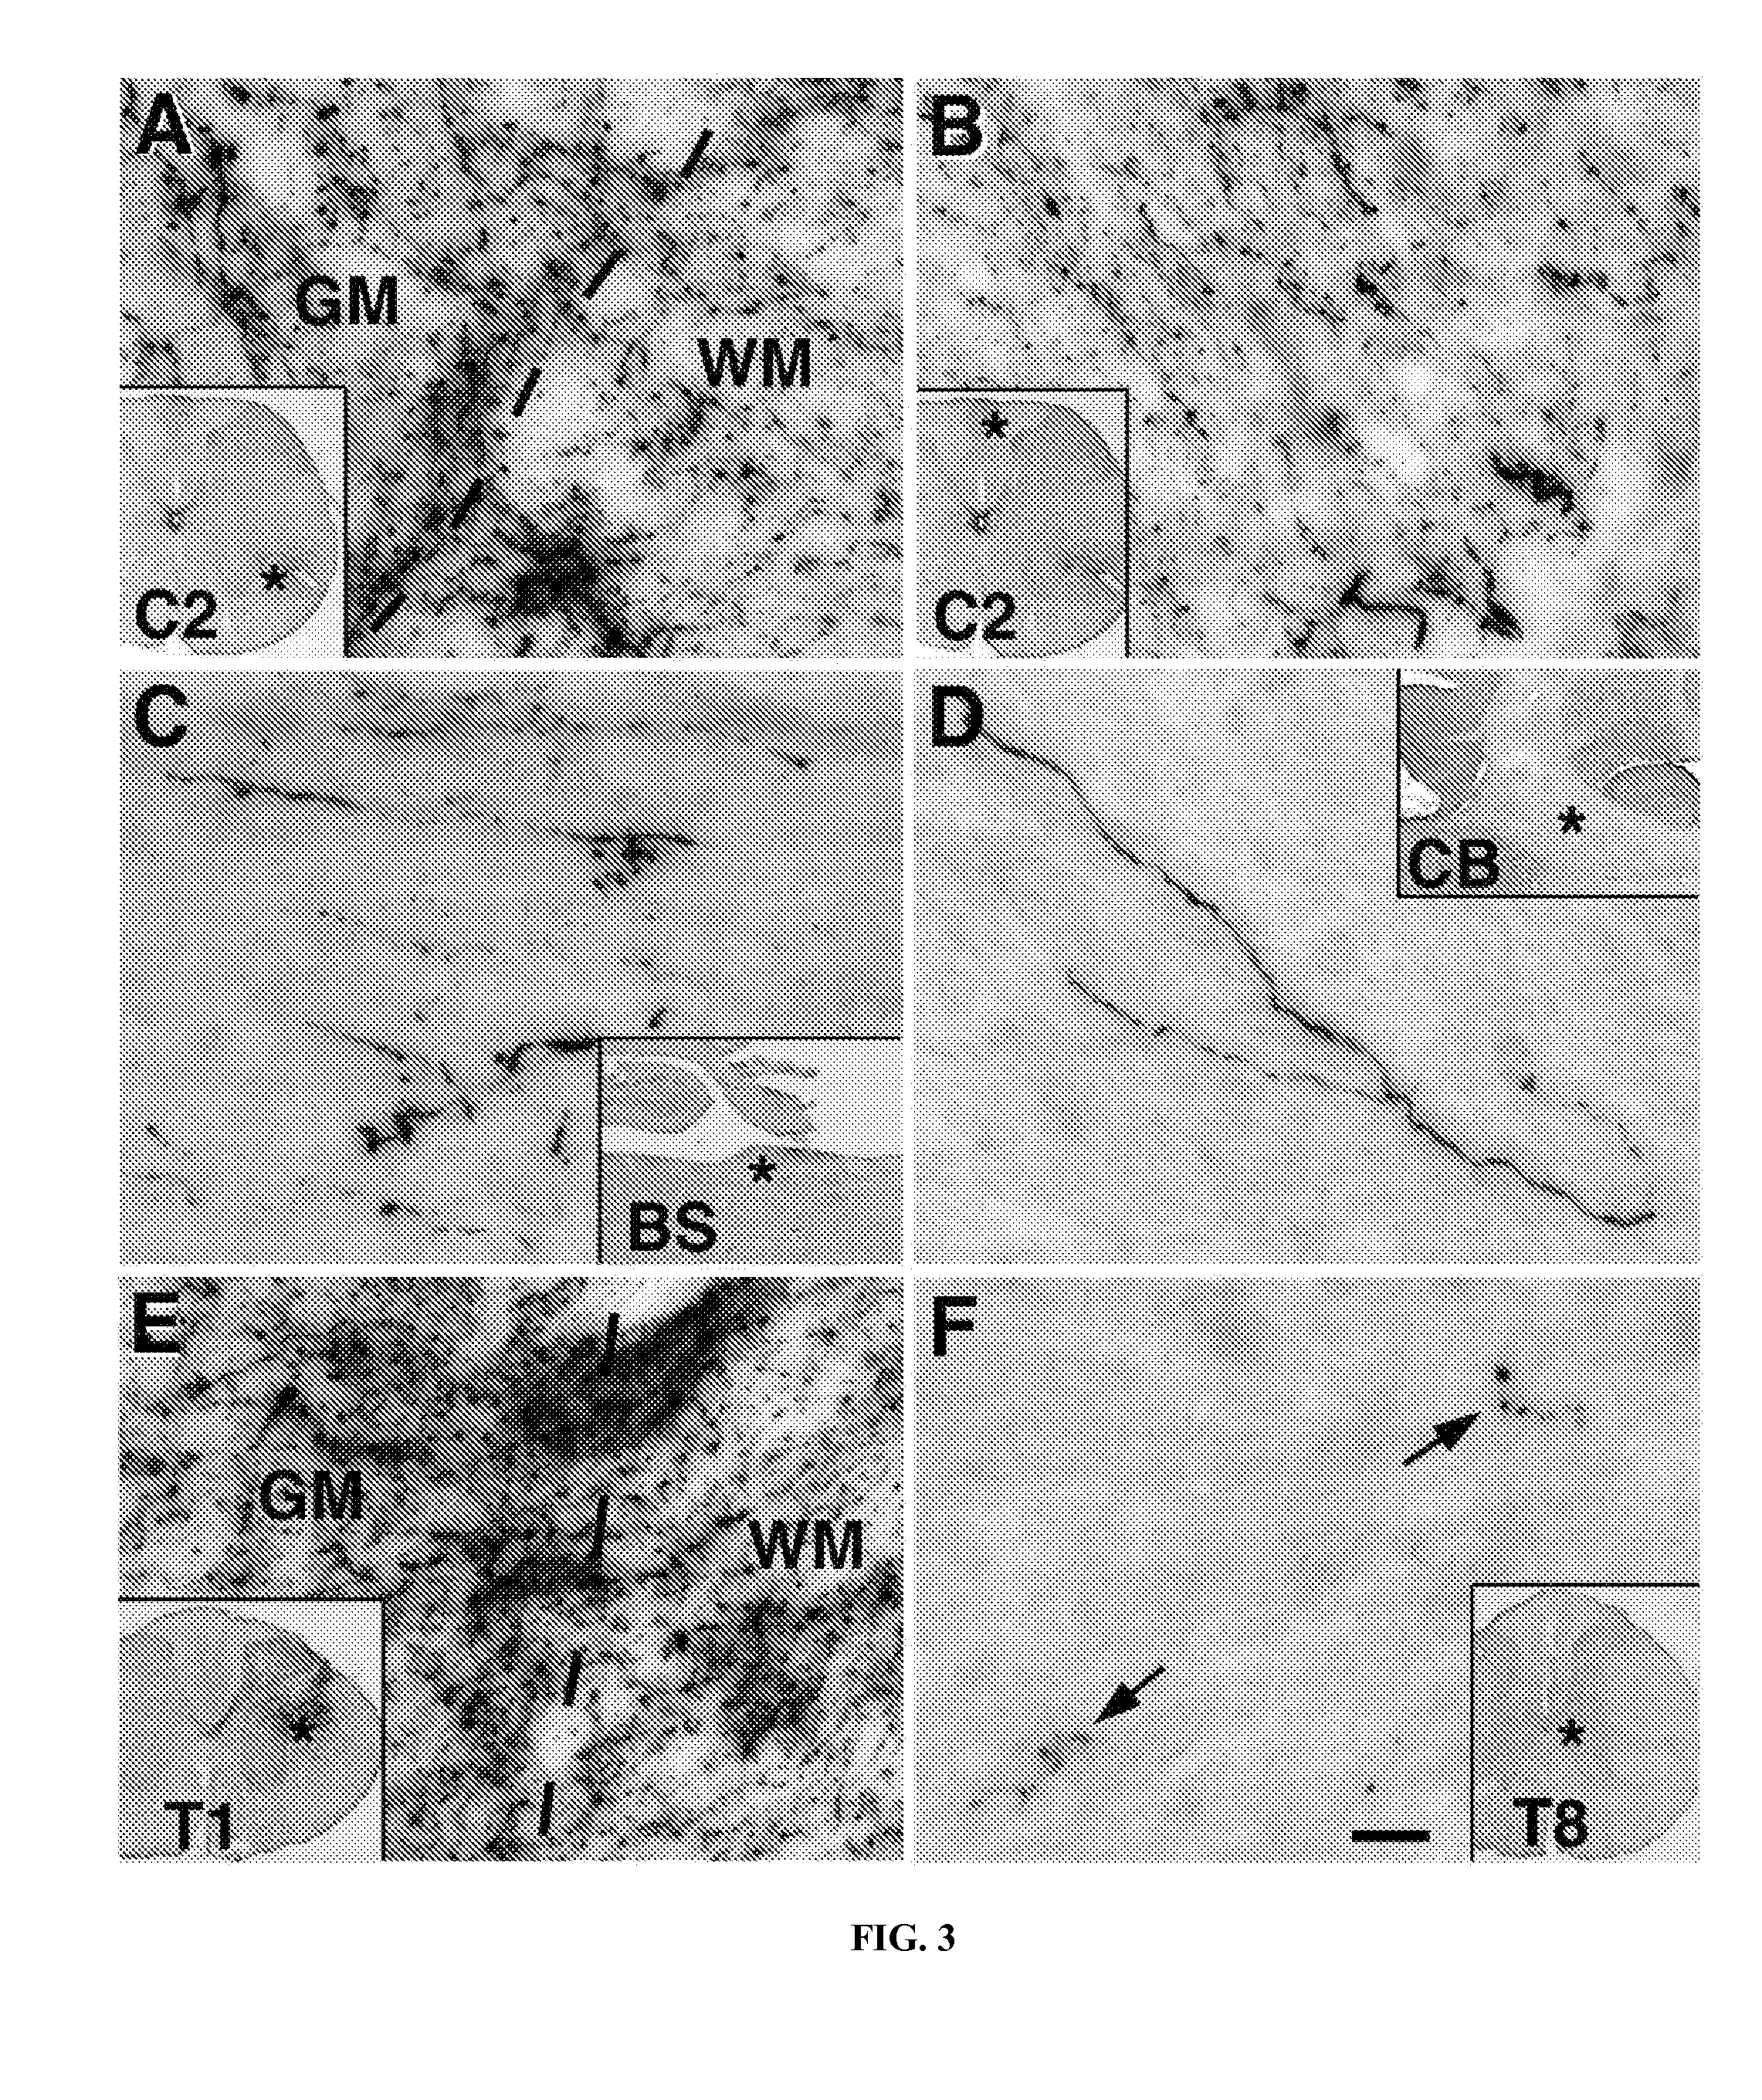 Methods for Use of Neural Stem Cell Compositions for Treatment of Central Nervous System Lesions